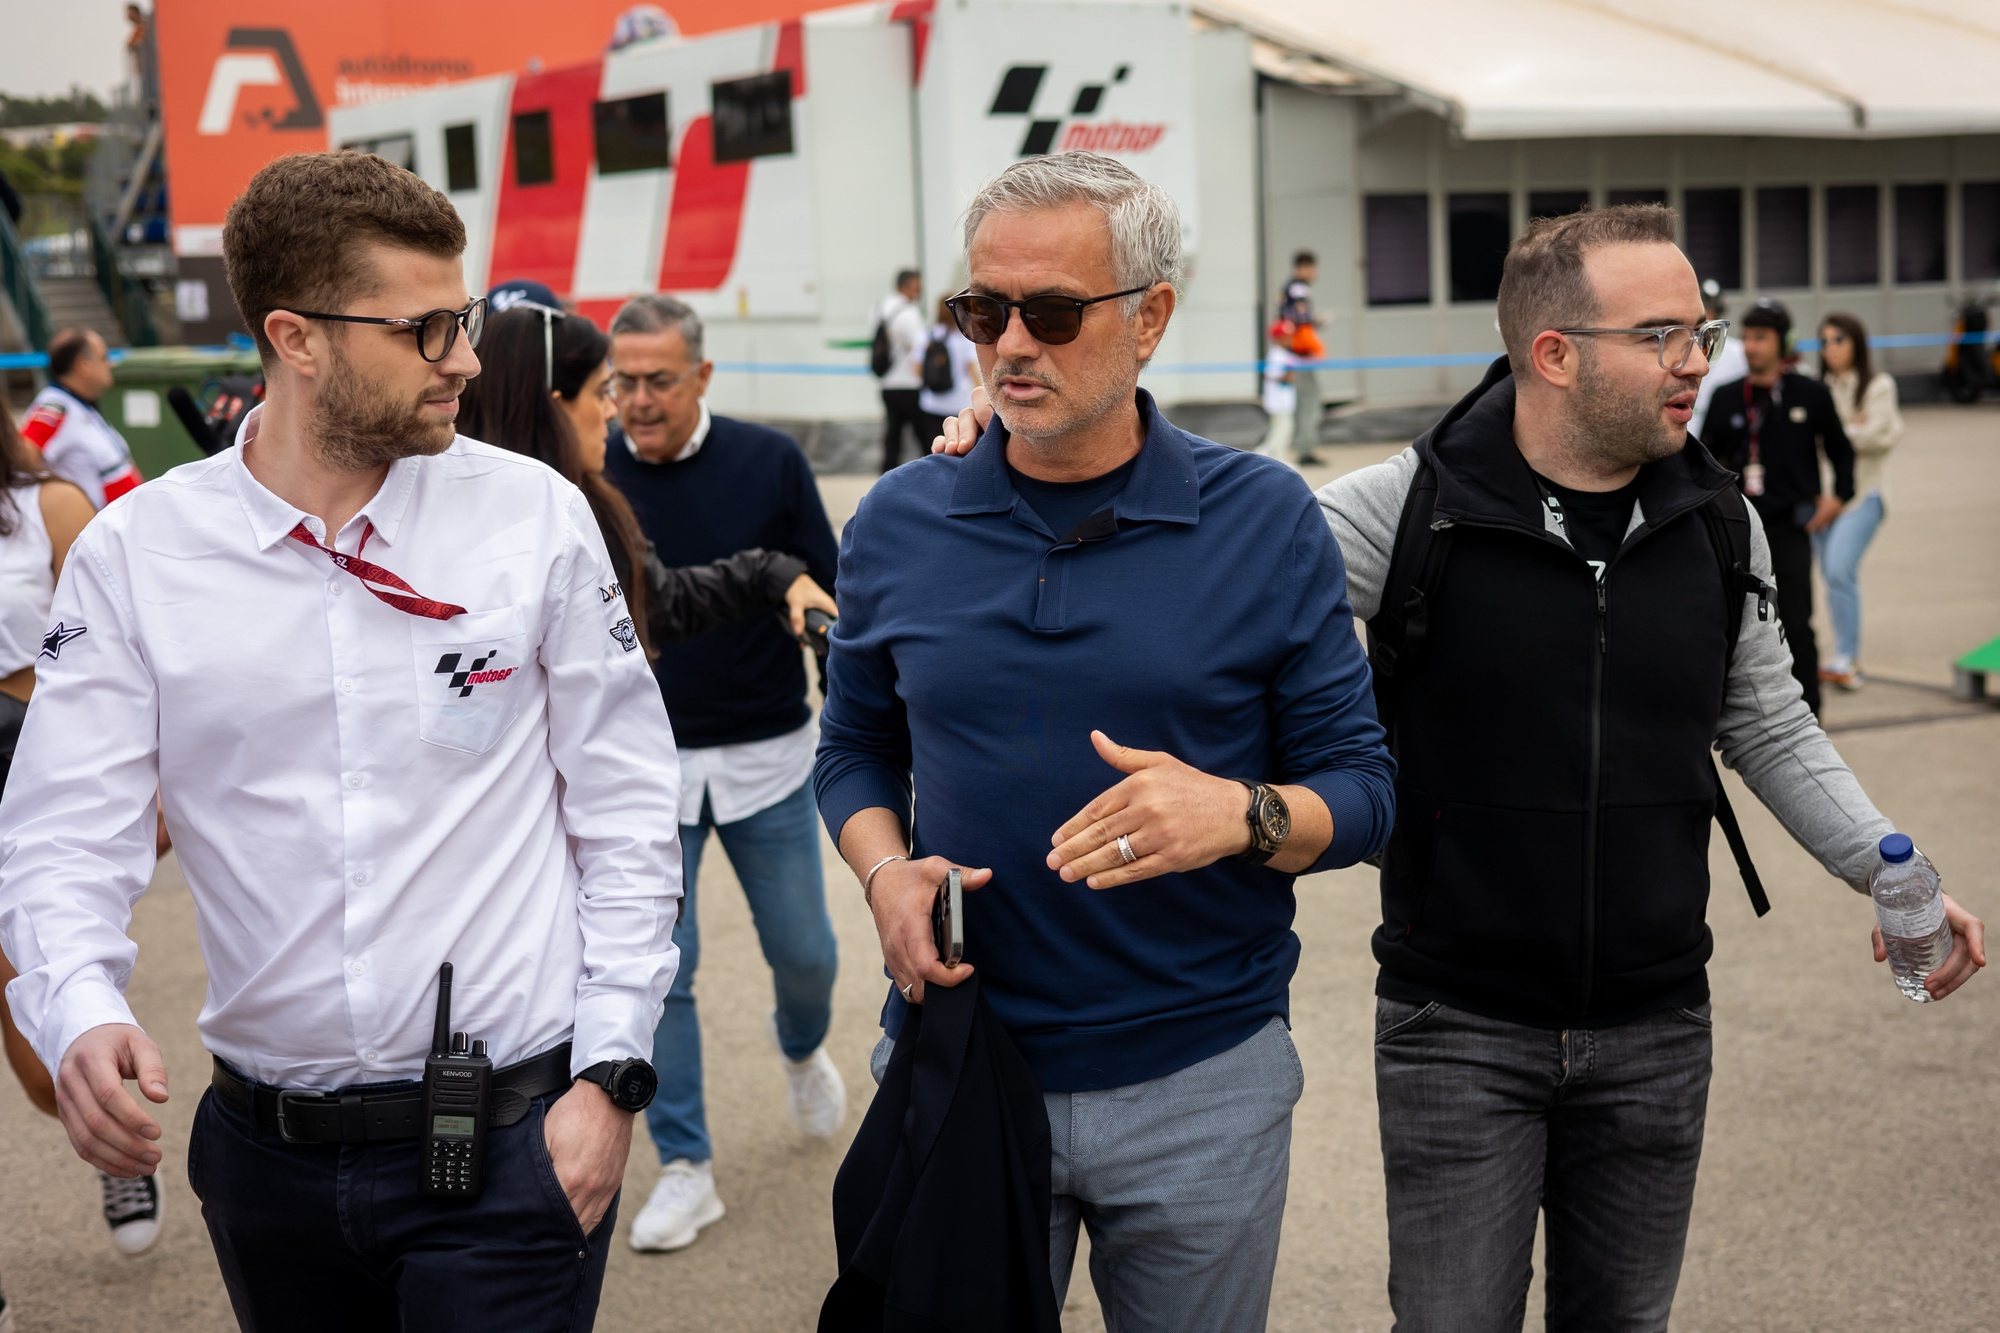 Football manager Jose Mourinho arrives at the paddock of the Motorcycling Grand Prix of Portugal that will take place later today, in Portimao, Portugal, 24 March 2024. JOSE SENA GOULAO/LUSA